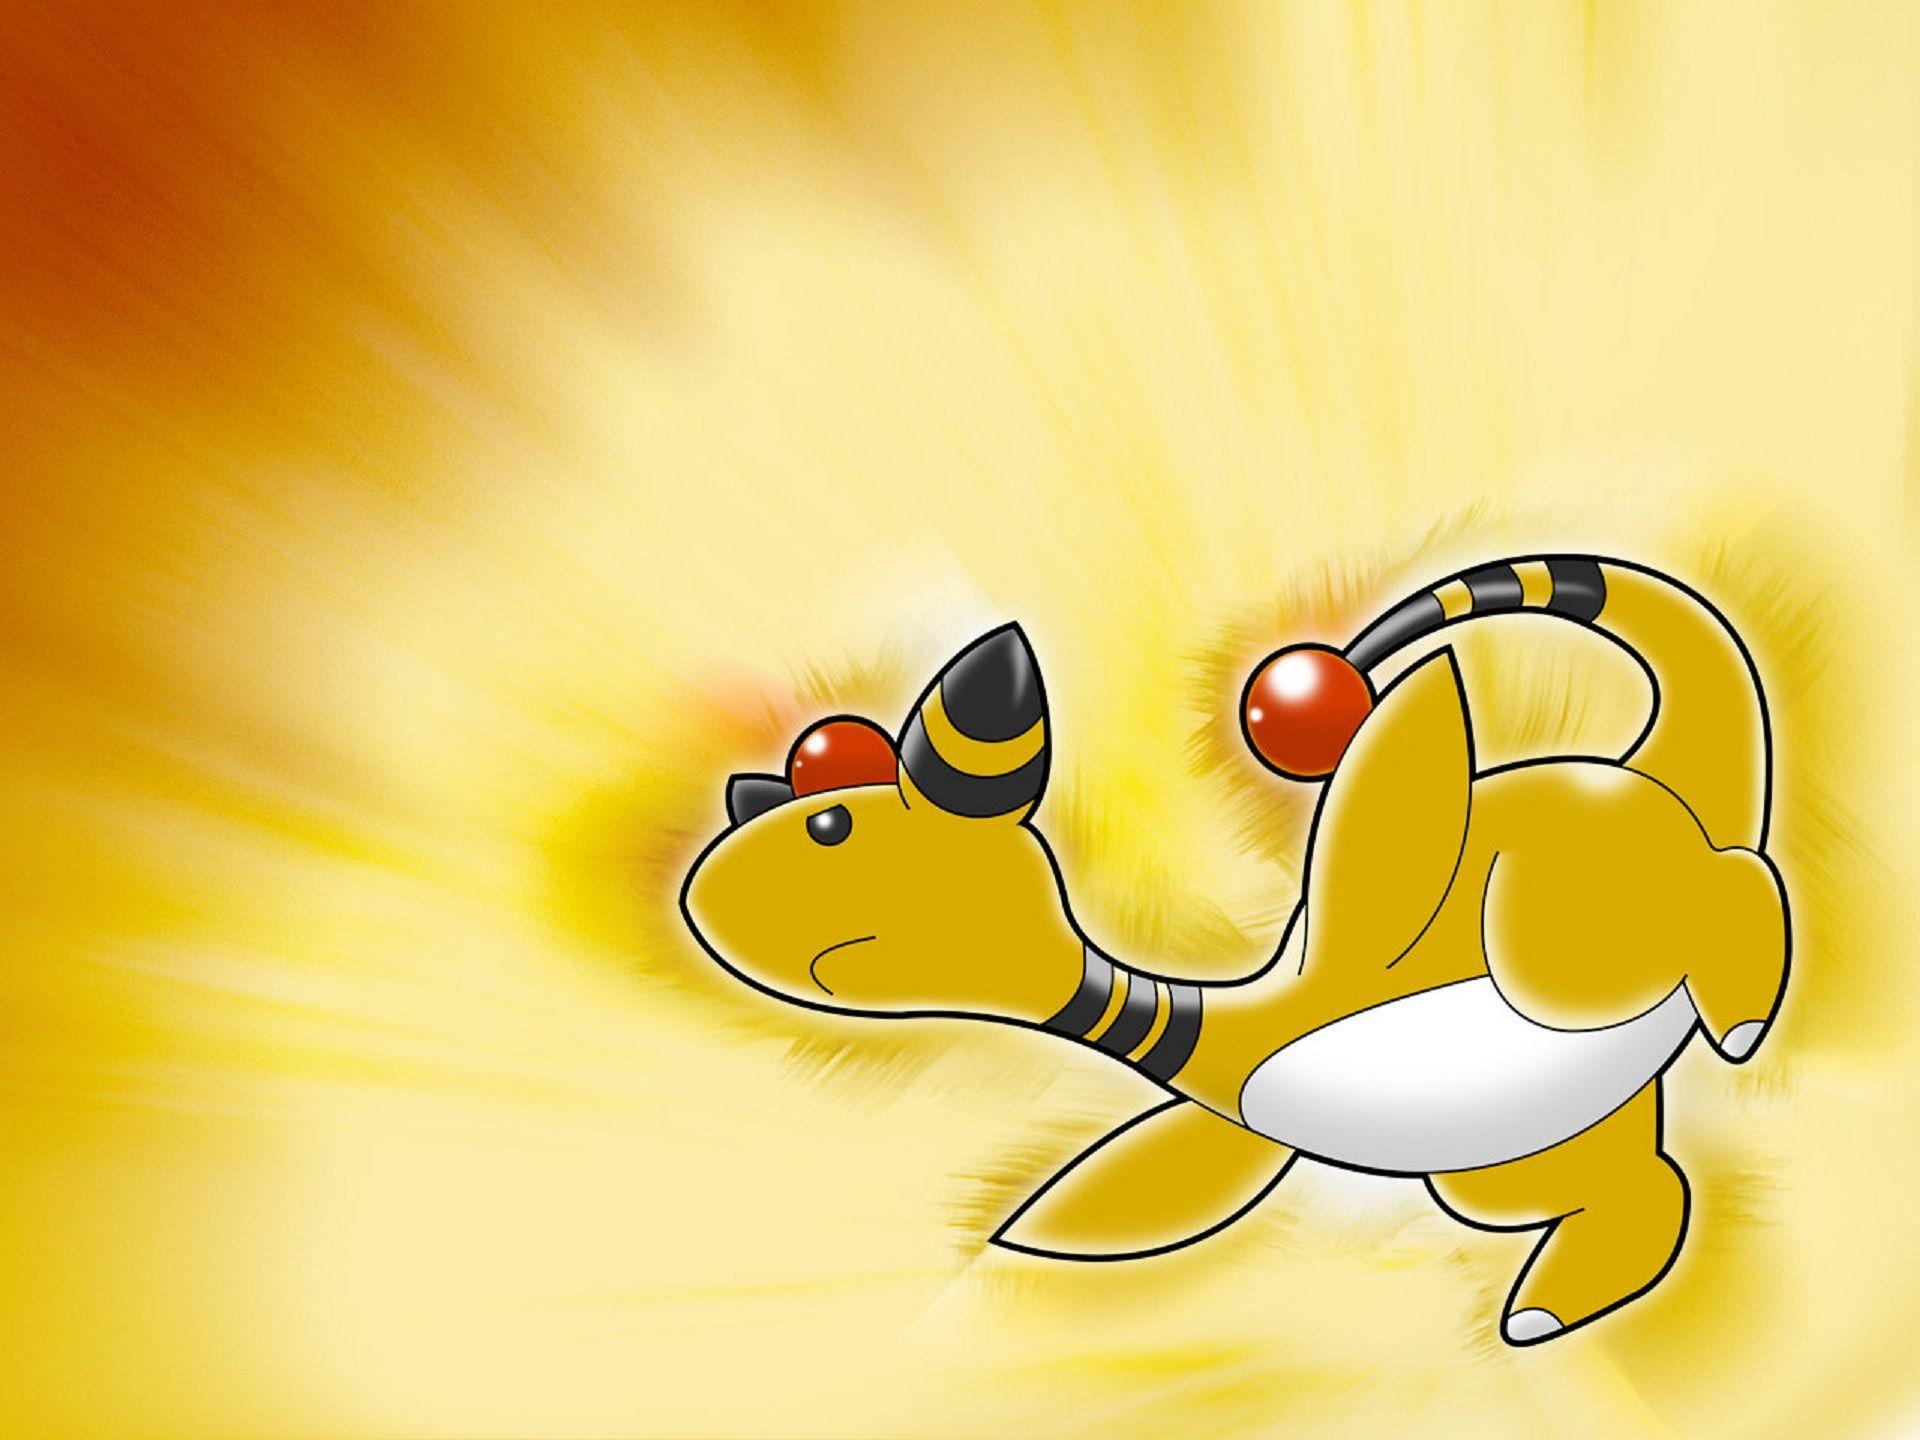 Ampharos Wallpapers Image Photos Pictures Backgrounds.